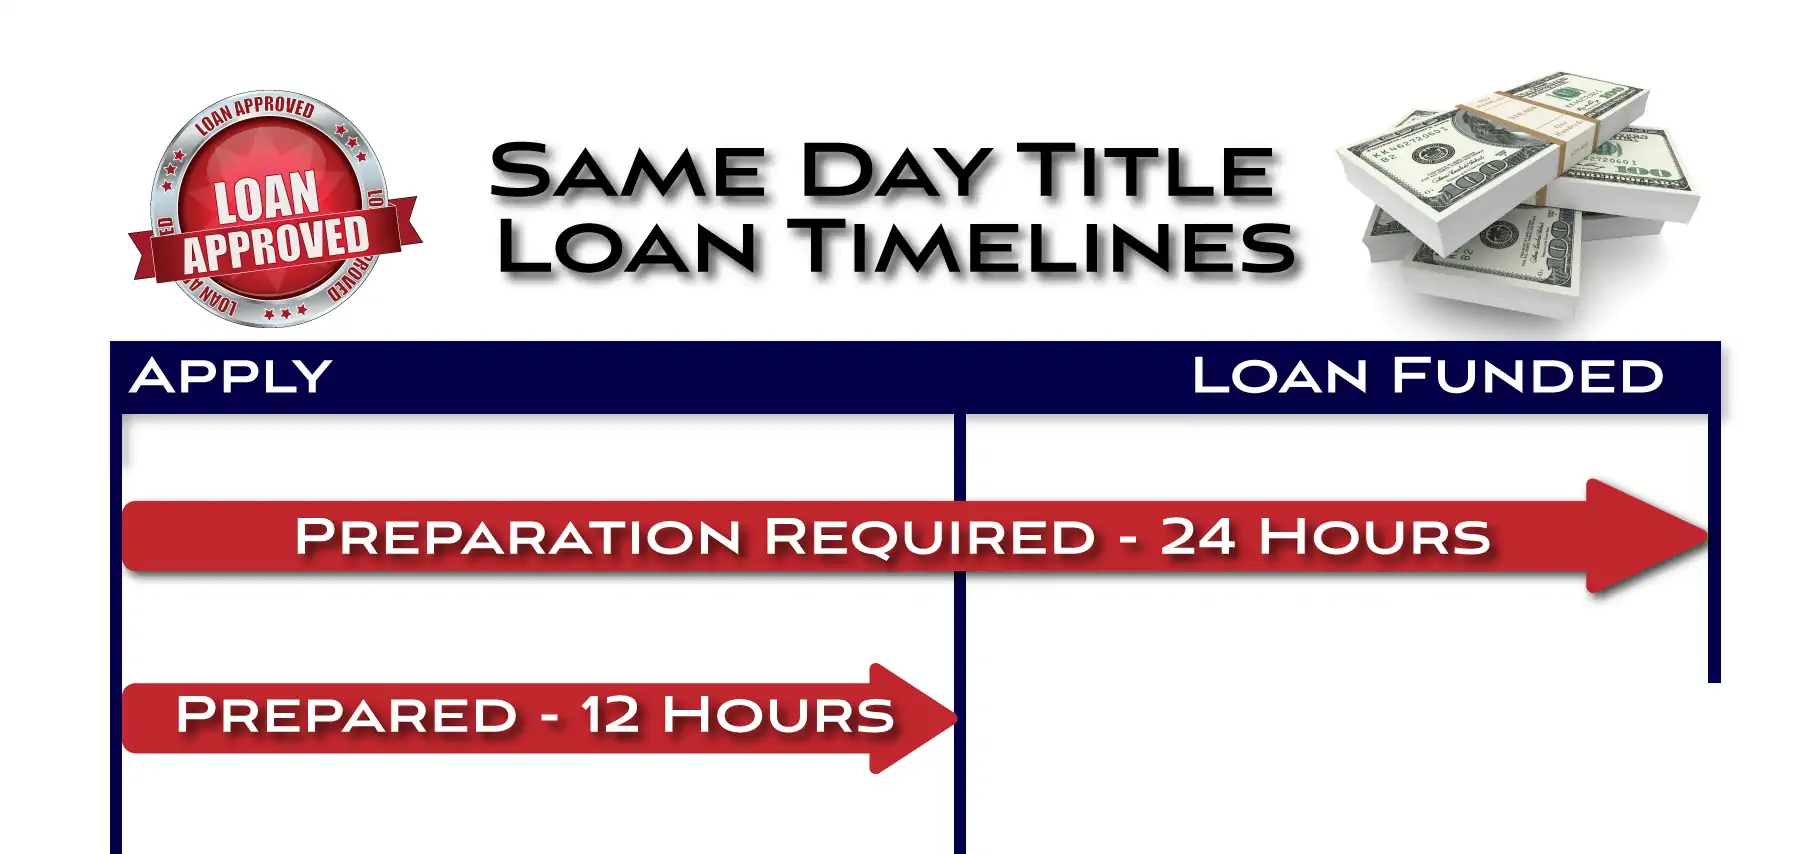 Same Day Title Loan Funding Times - Prepared = 12 Hours, Preparation Required = 24 hours